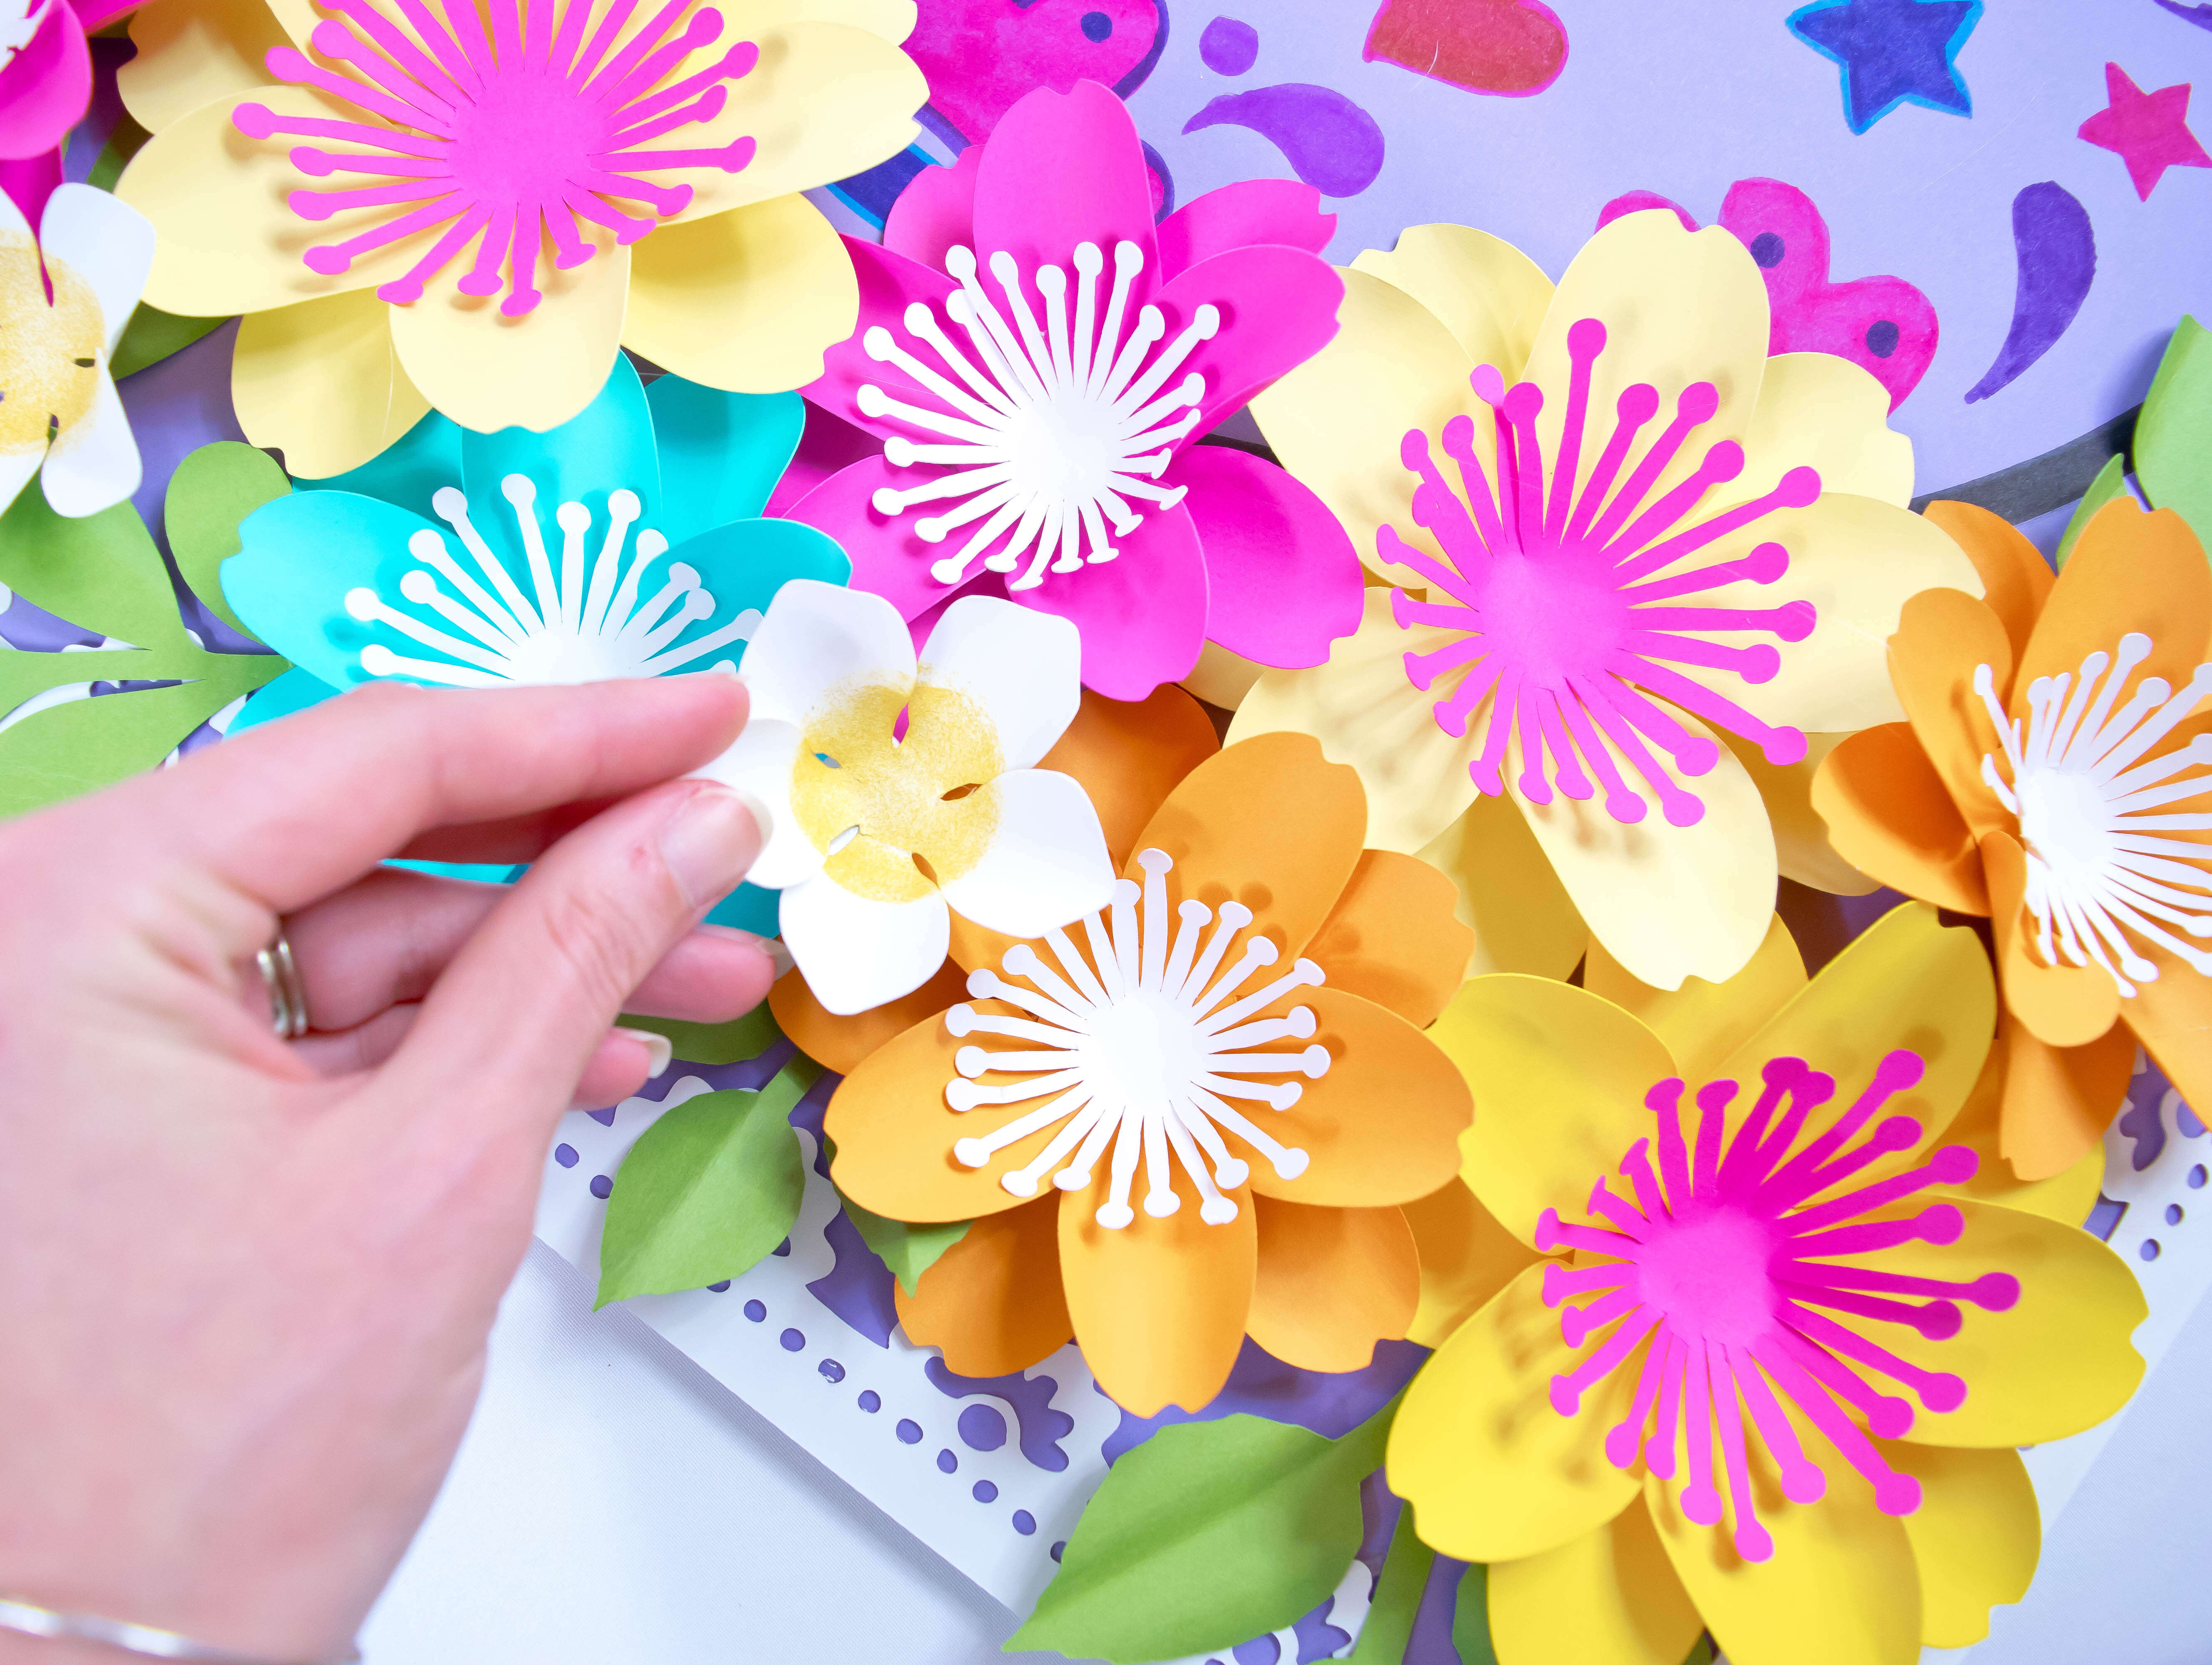 Small paper flowers